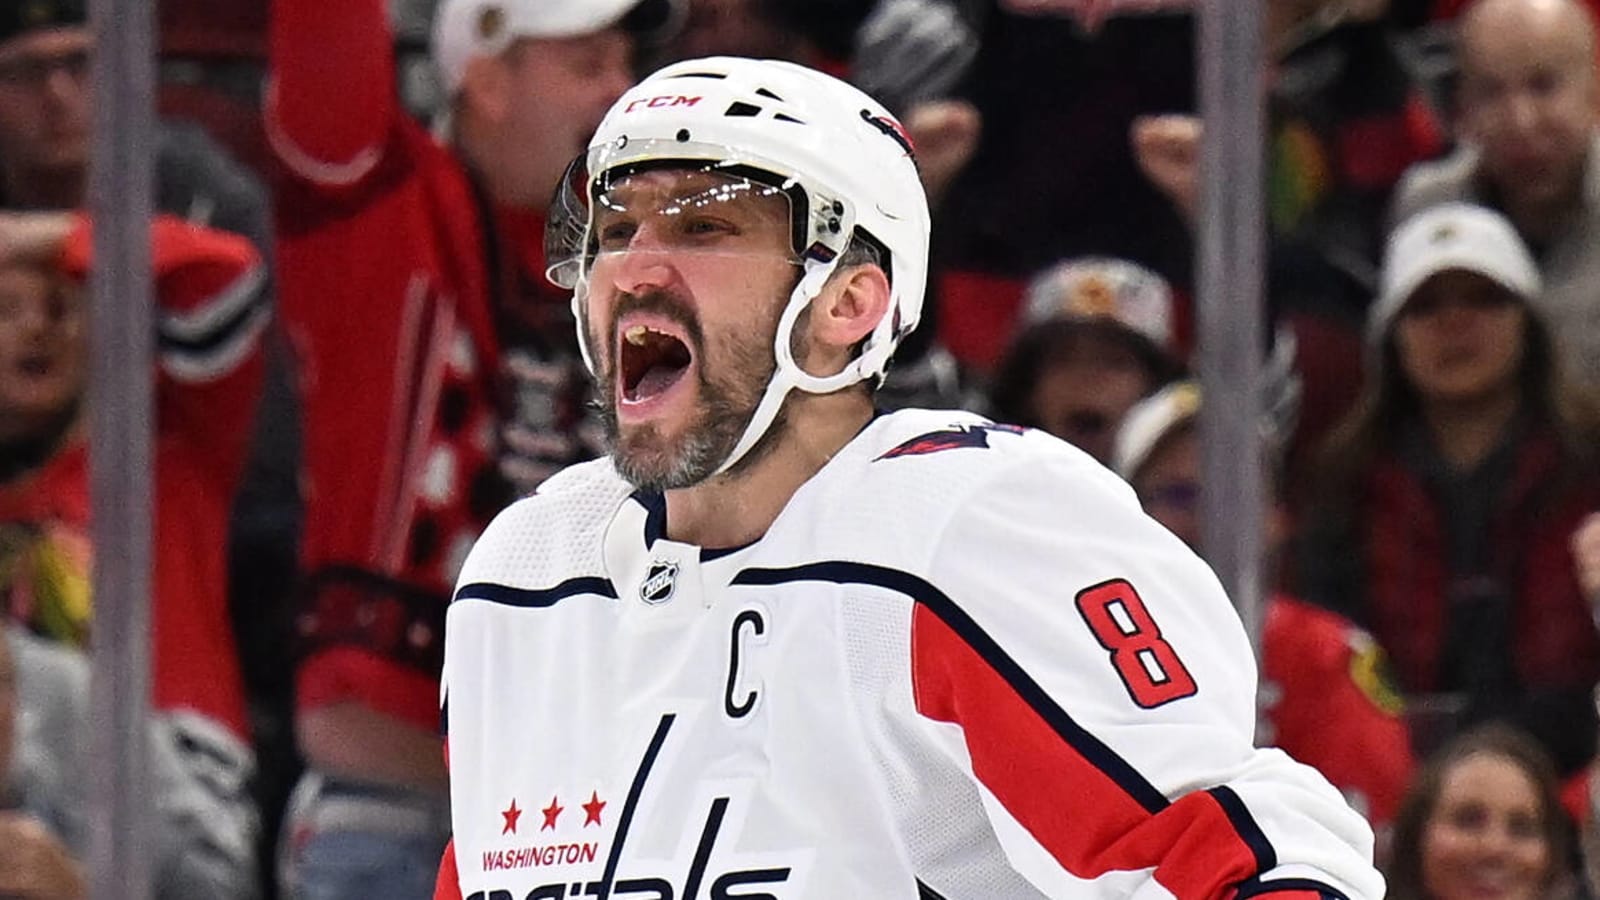 Capitals had epic locker room celebration for Ovechkin's 800th goal